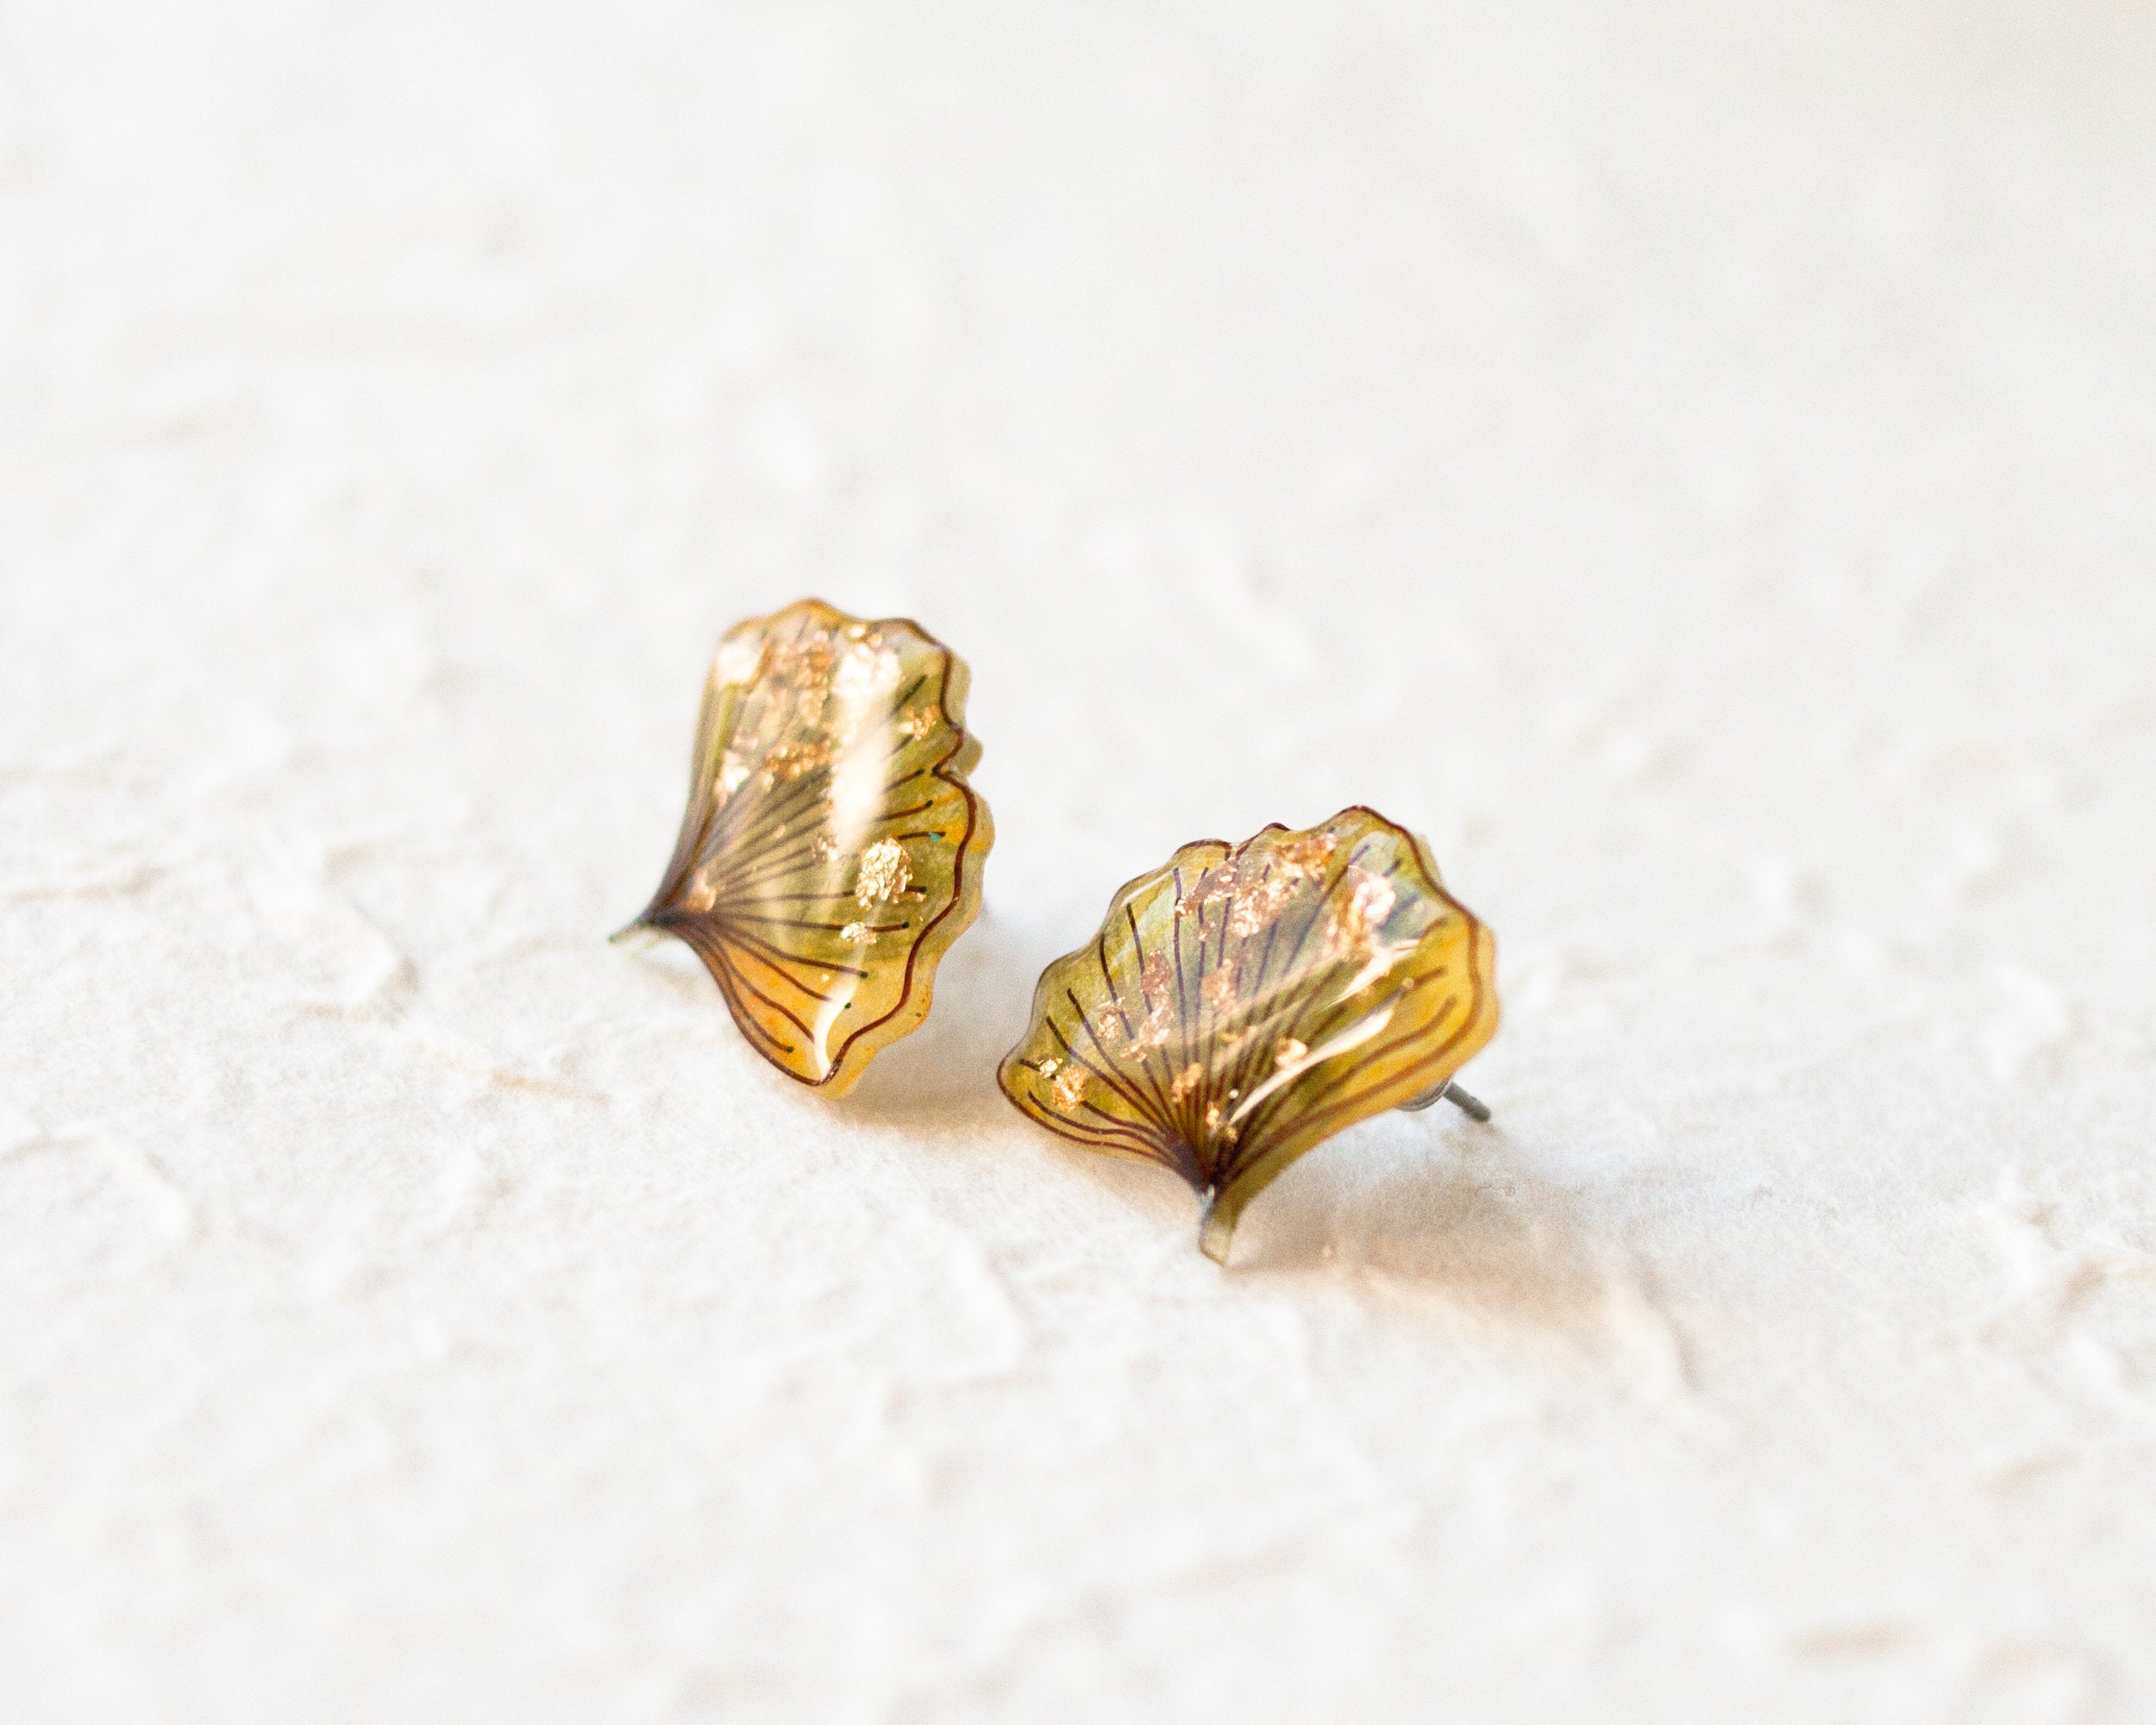 Ginkgo Biloba Leaf Statement Stud Earrings with Gold Accents